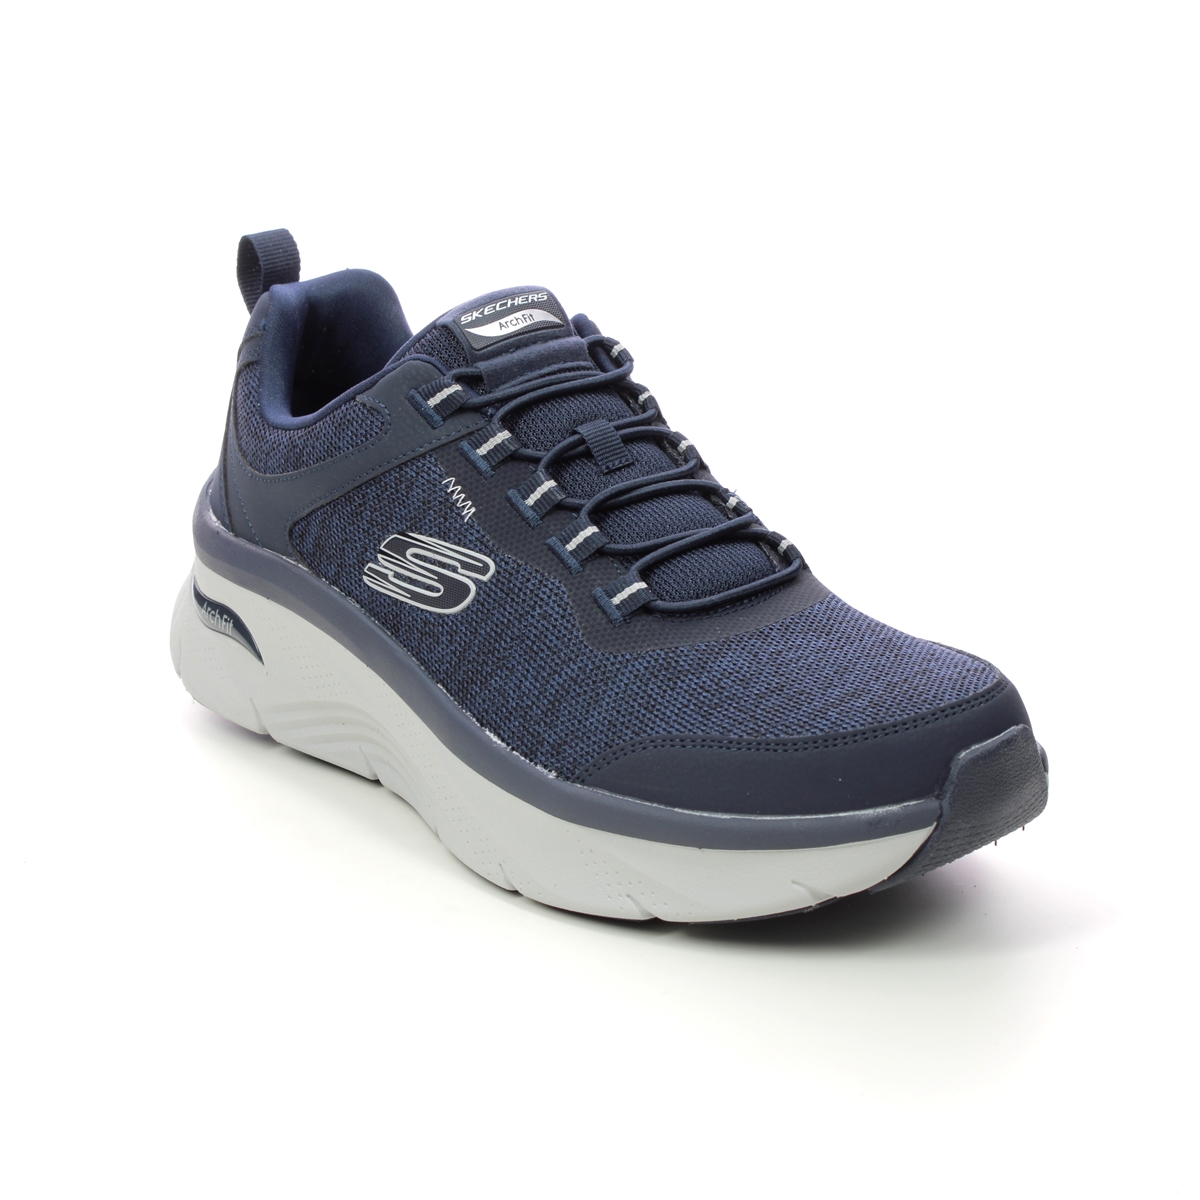 Skechers Wide Fit Shoes 2018 | lupon.gov.ph